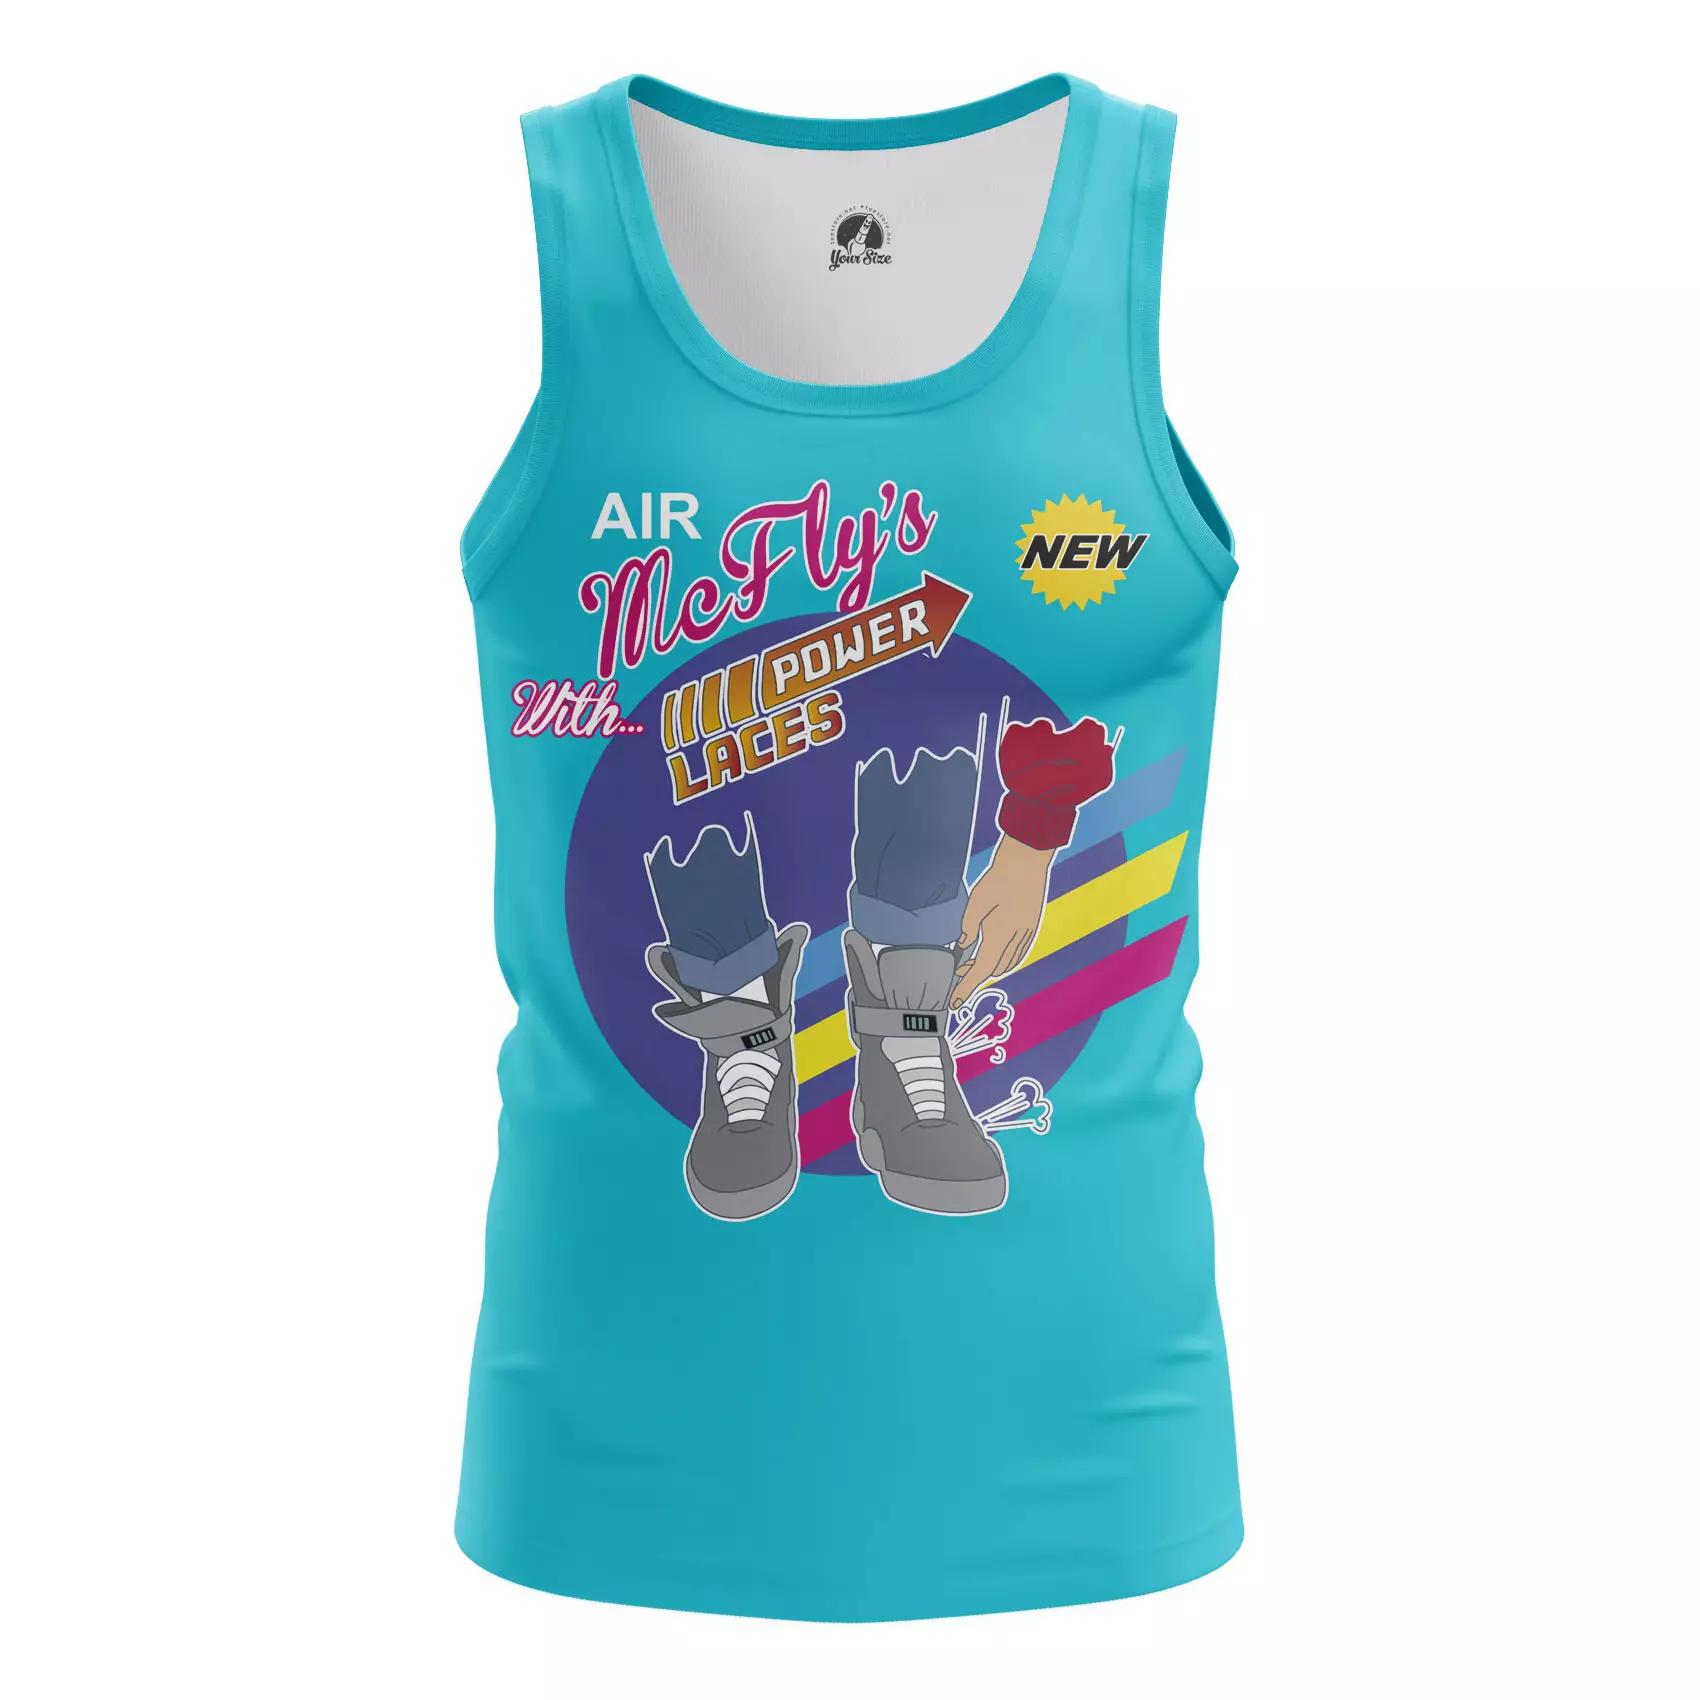 Men’s tank Mcfly’s Power Laces Back to Future Vest Idolstore - Merchandise and Collectibles Merchandise, Toys and Collectibles 2